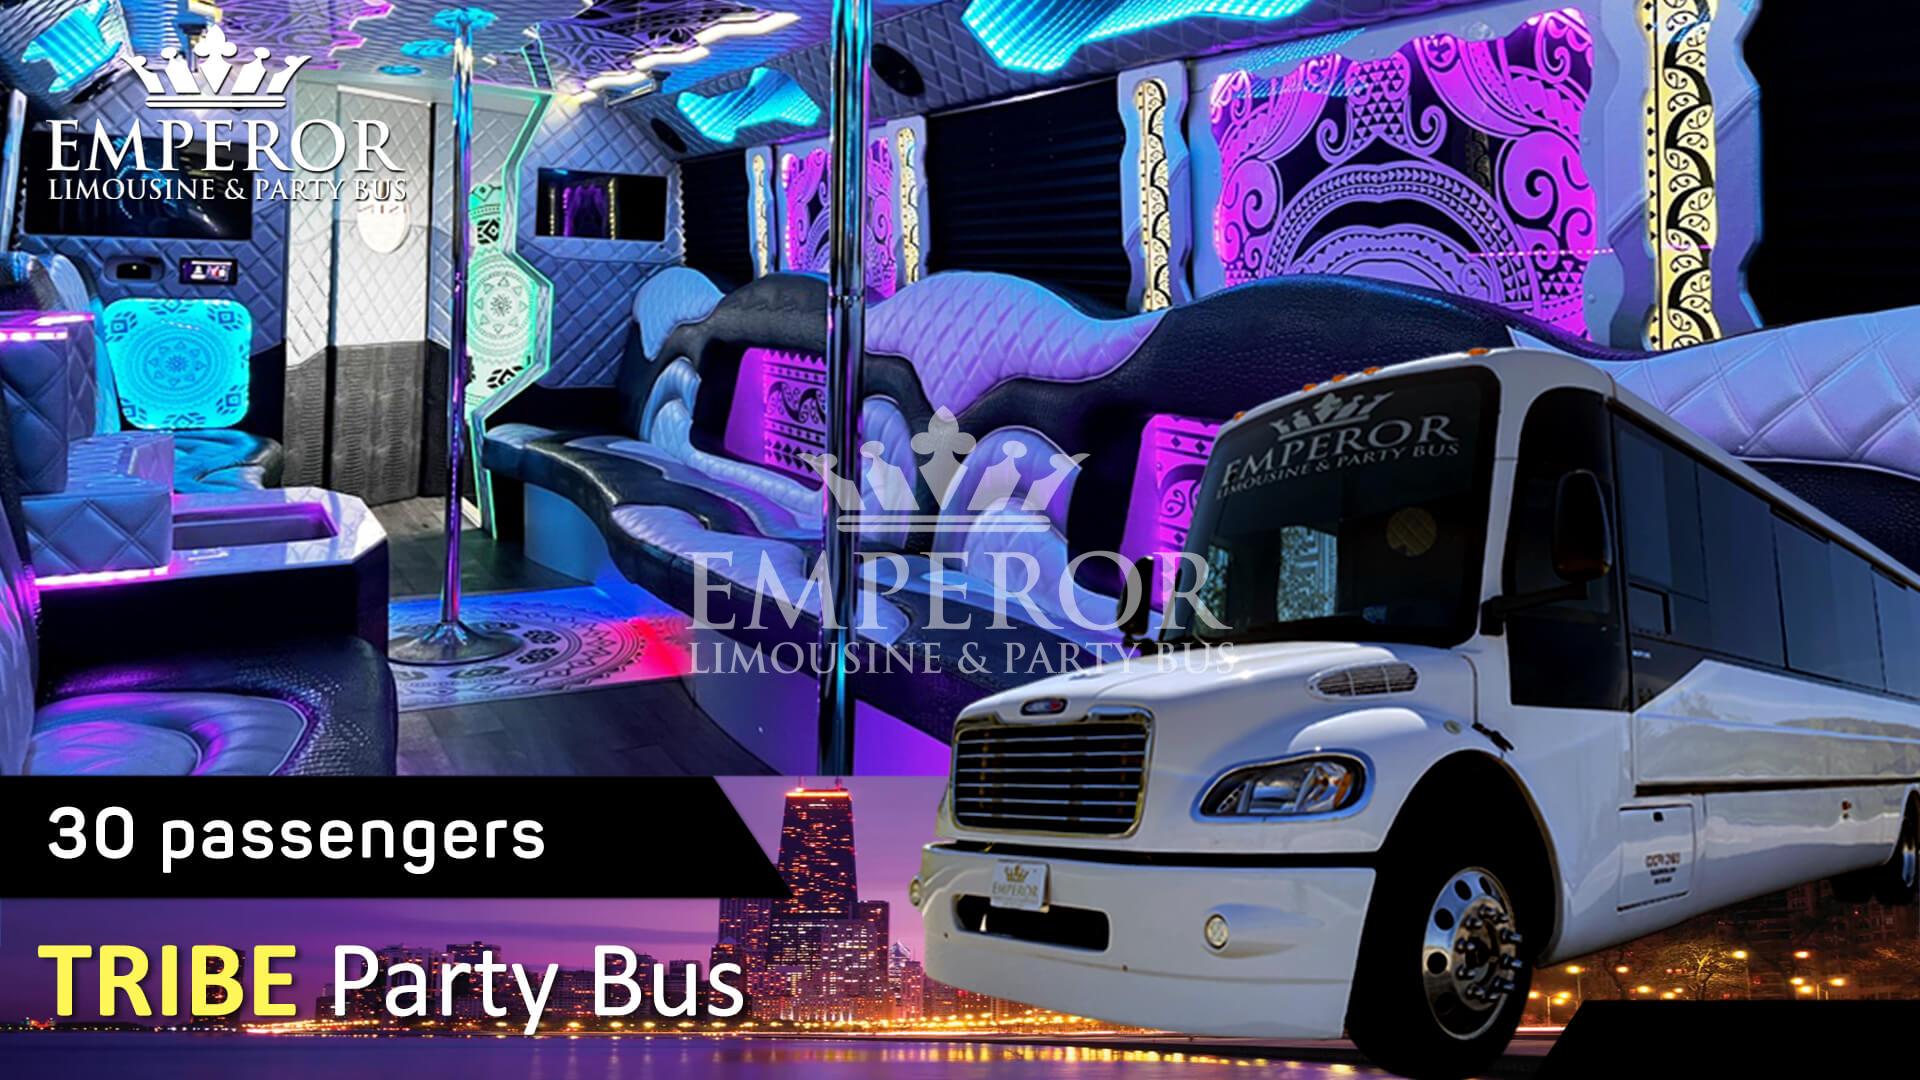 Corporate party bus in Chicago - Tribe edition